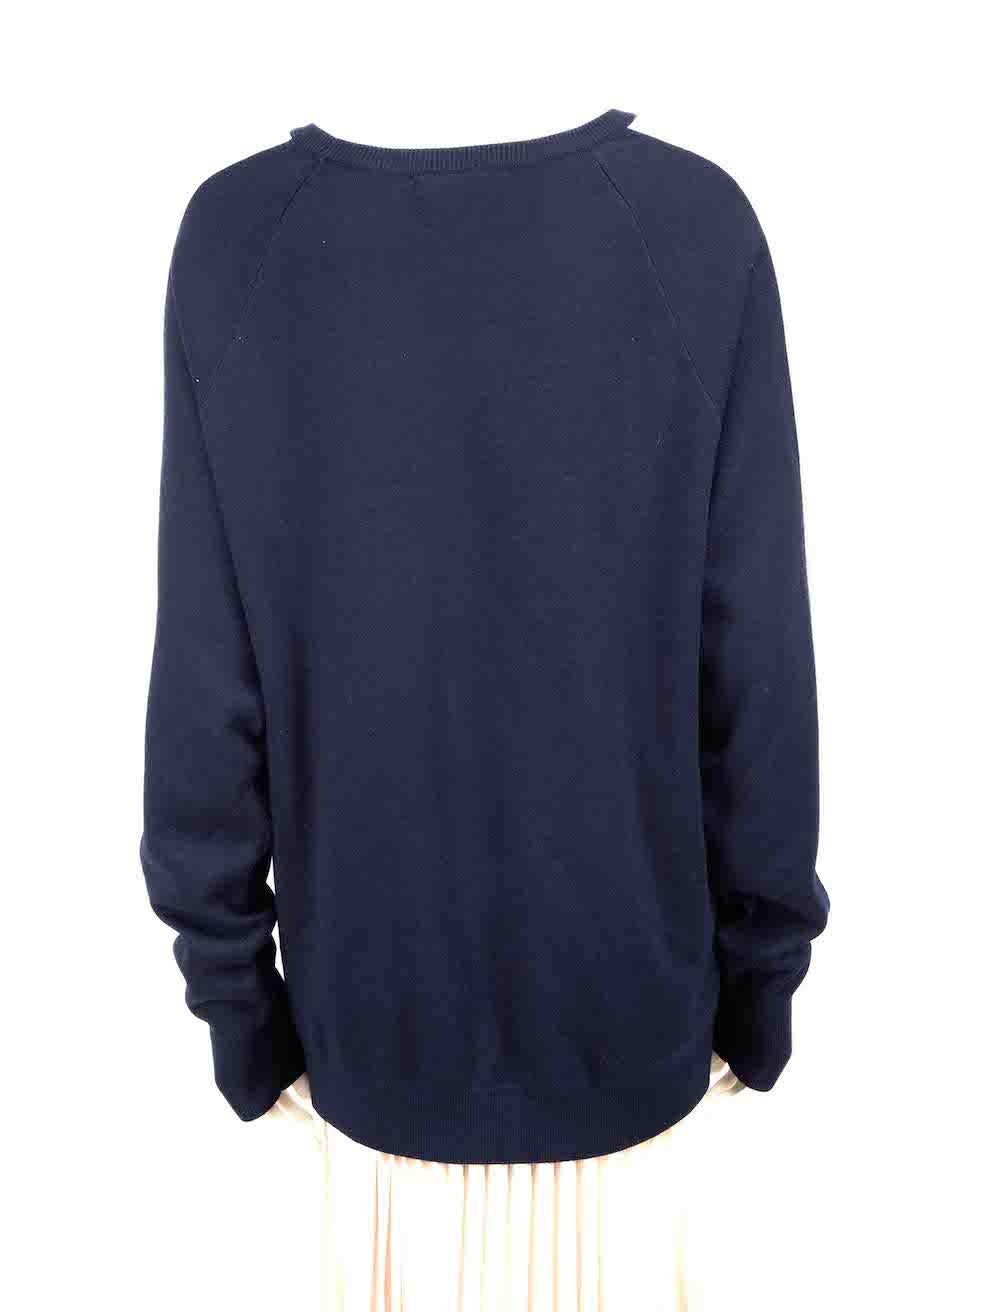 Olivia Von Halle Blue Silk Knit Oversized Jumper Size M In Good Condition For Sale In London, GB